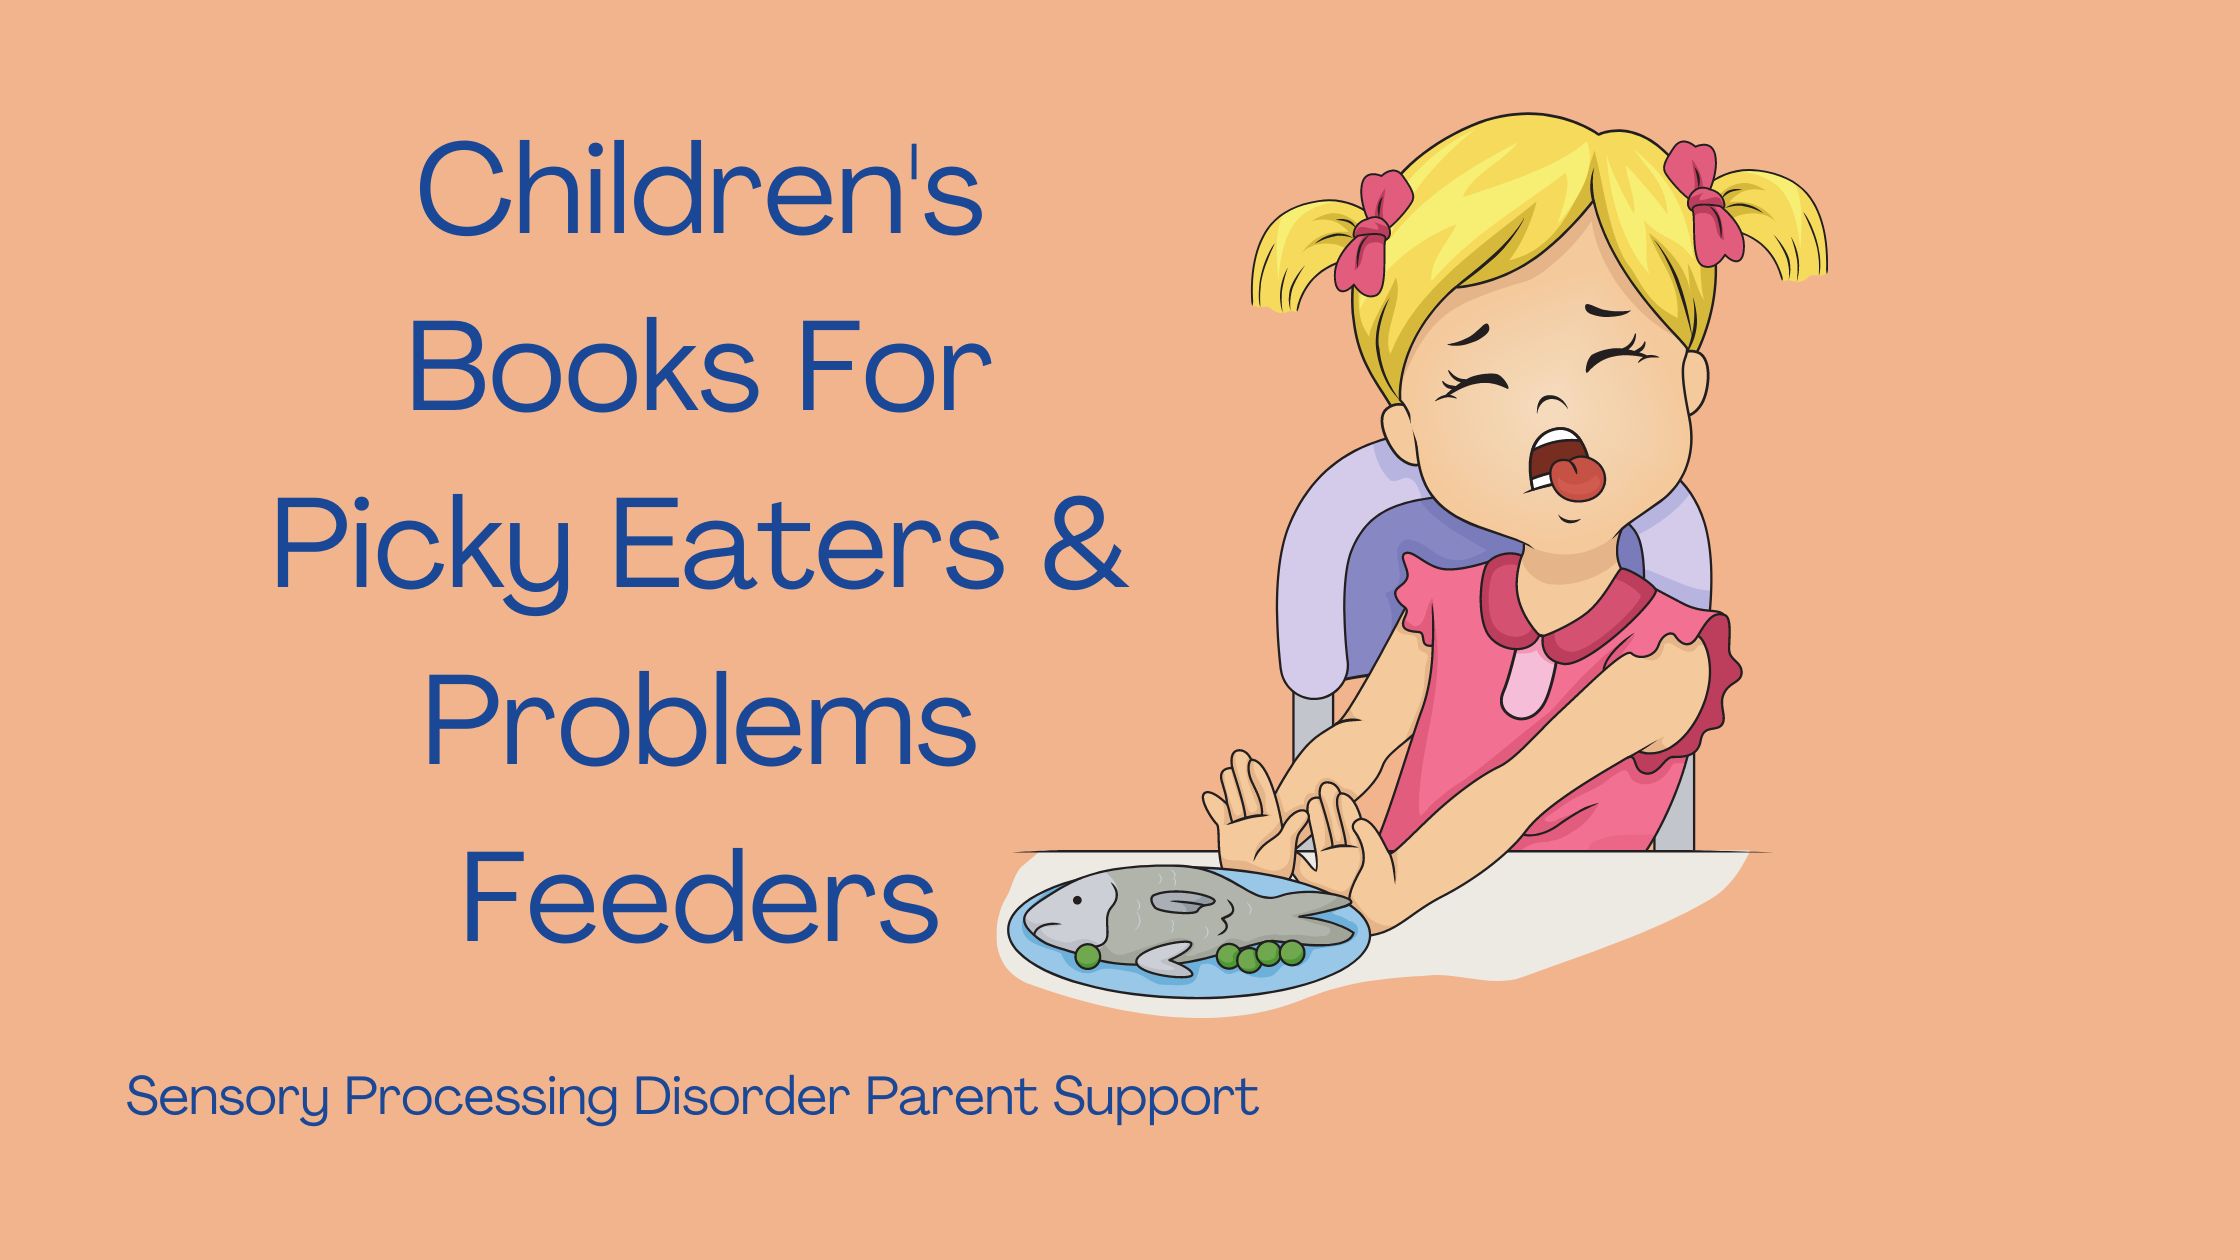 child with sensory processing disorder refusing to eat her food and pushing away her meal Children's Books For Picky Eaters & Problems Feeders